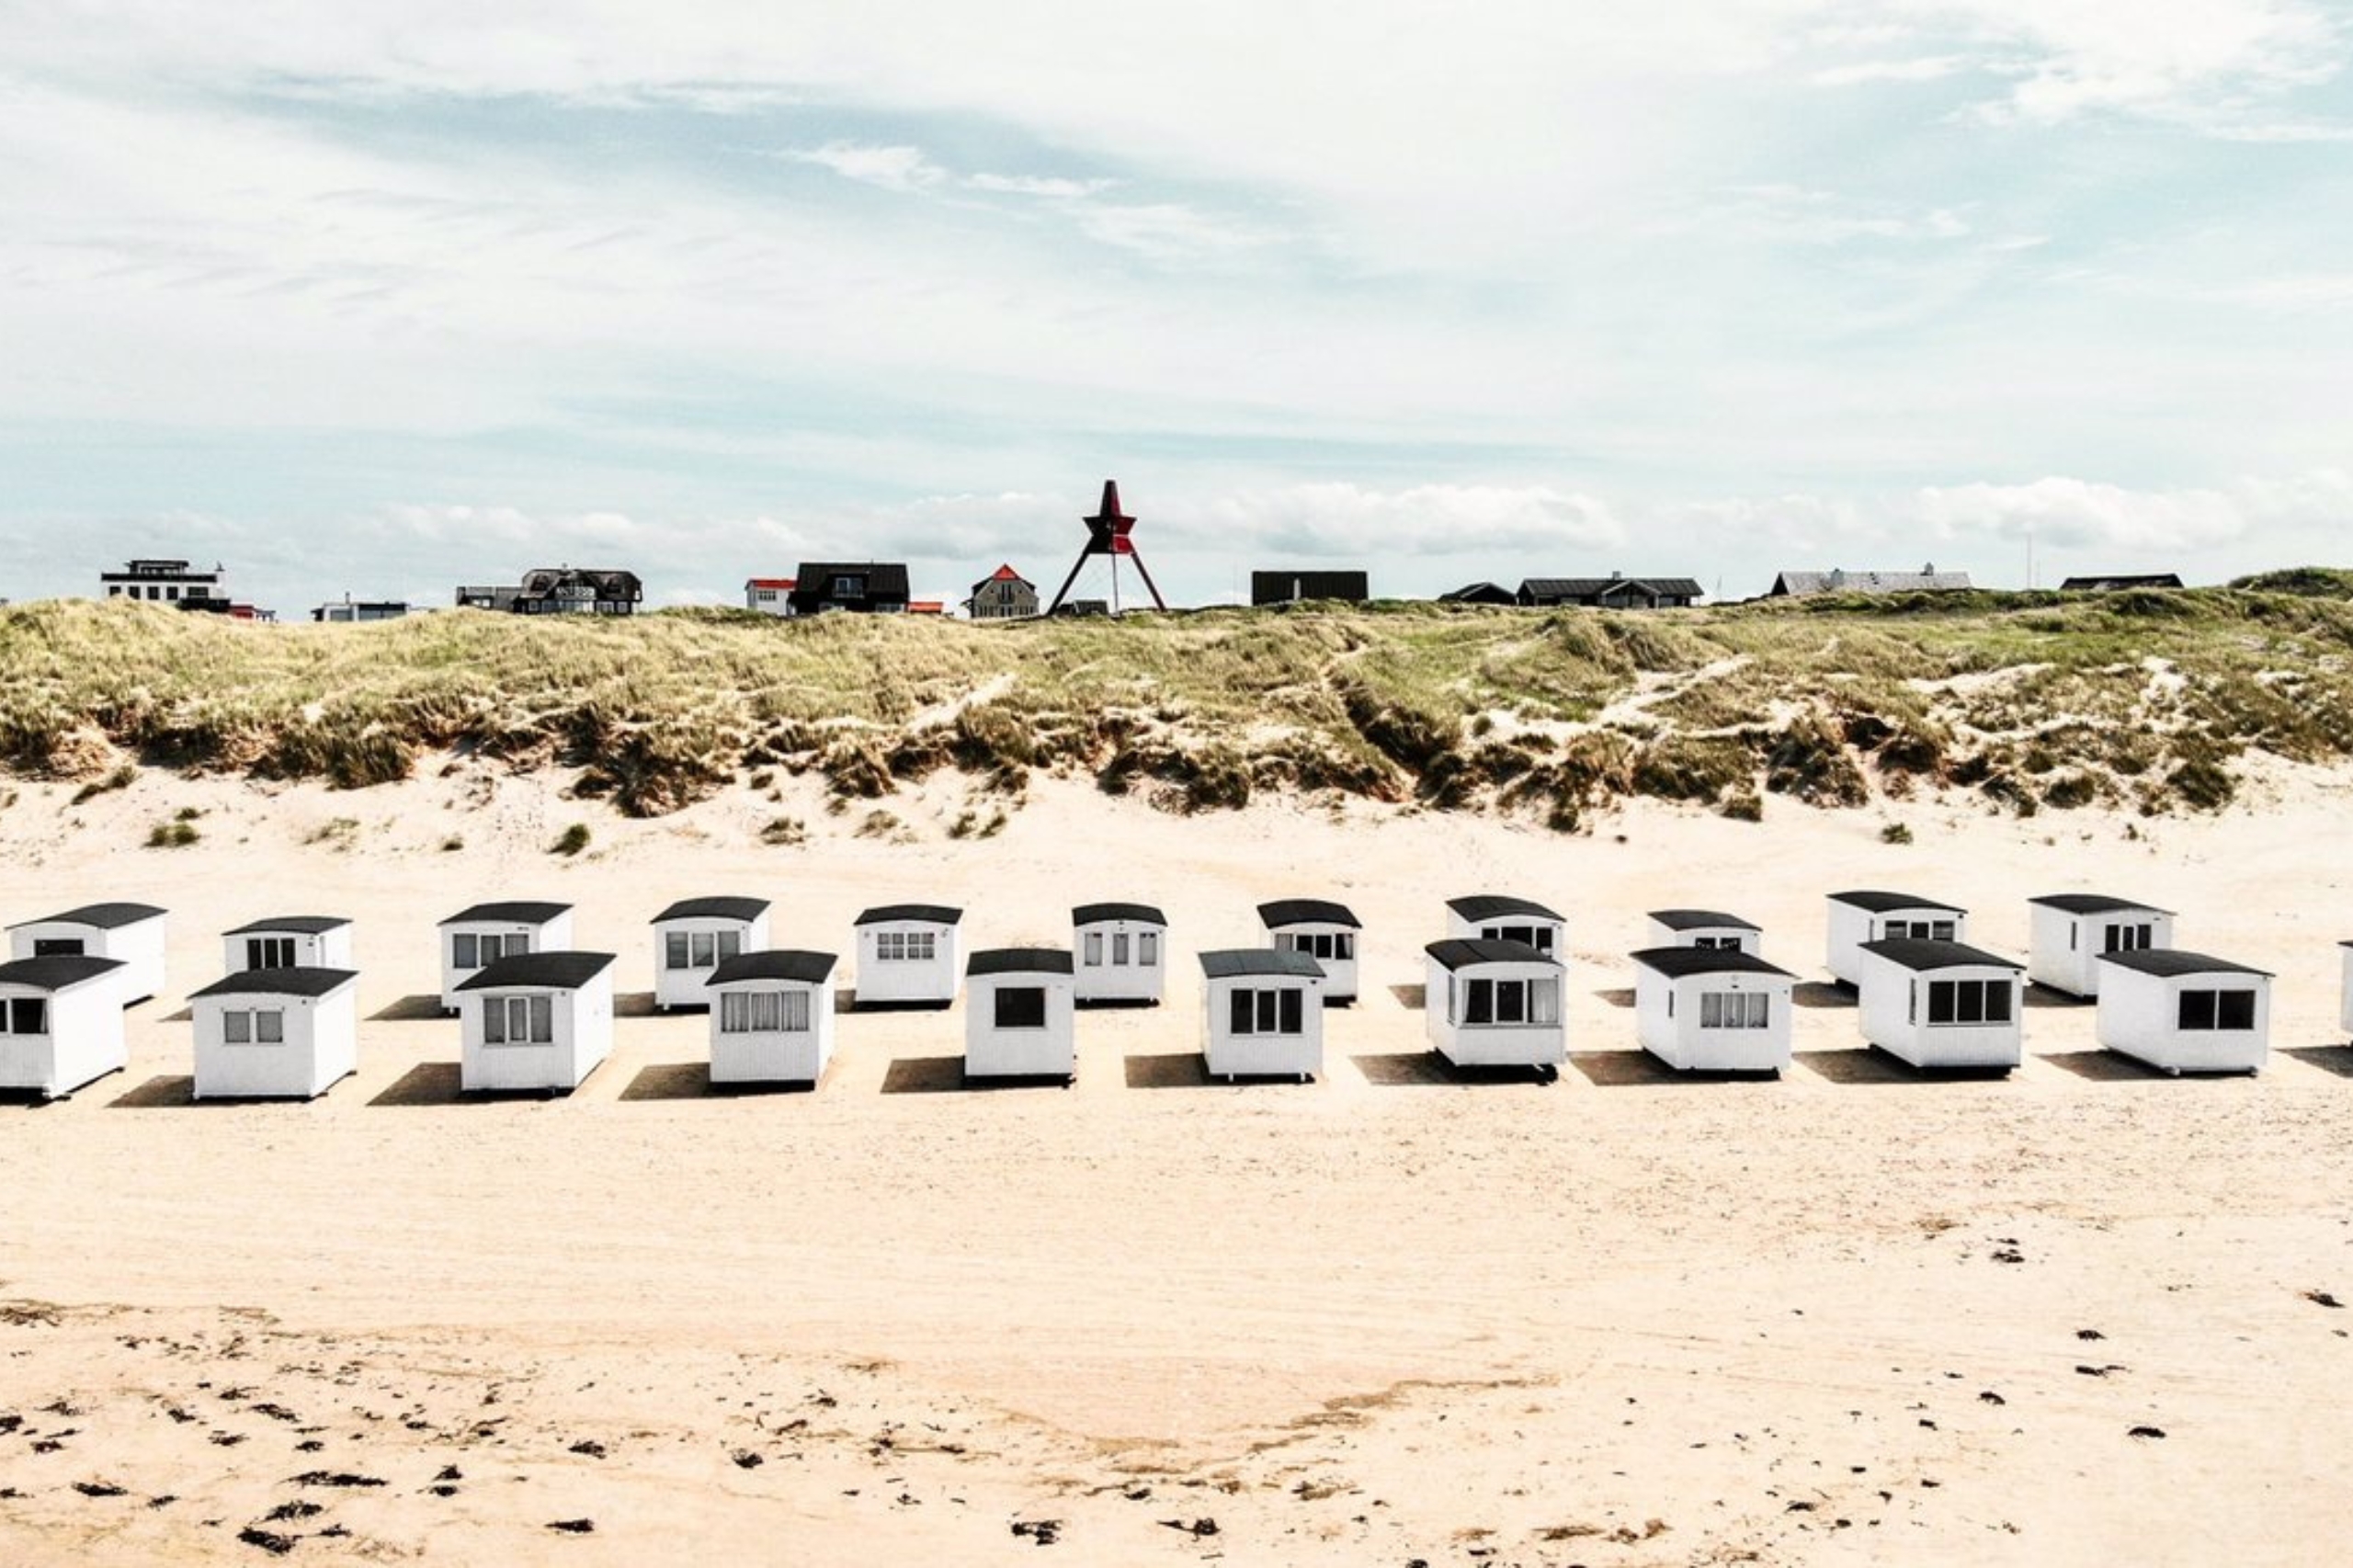 Almost 500 historic white bathhouses are lined up on Løkken Strand and make for a great photo opportunity.